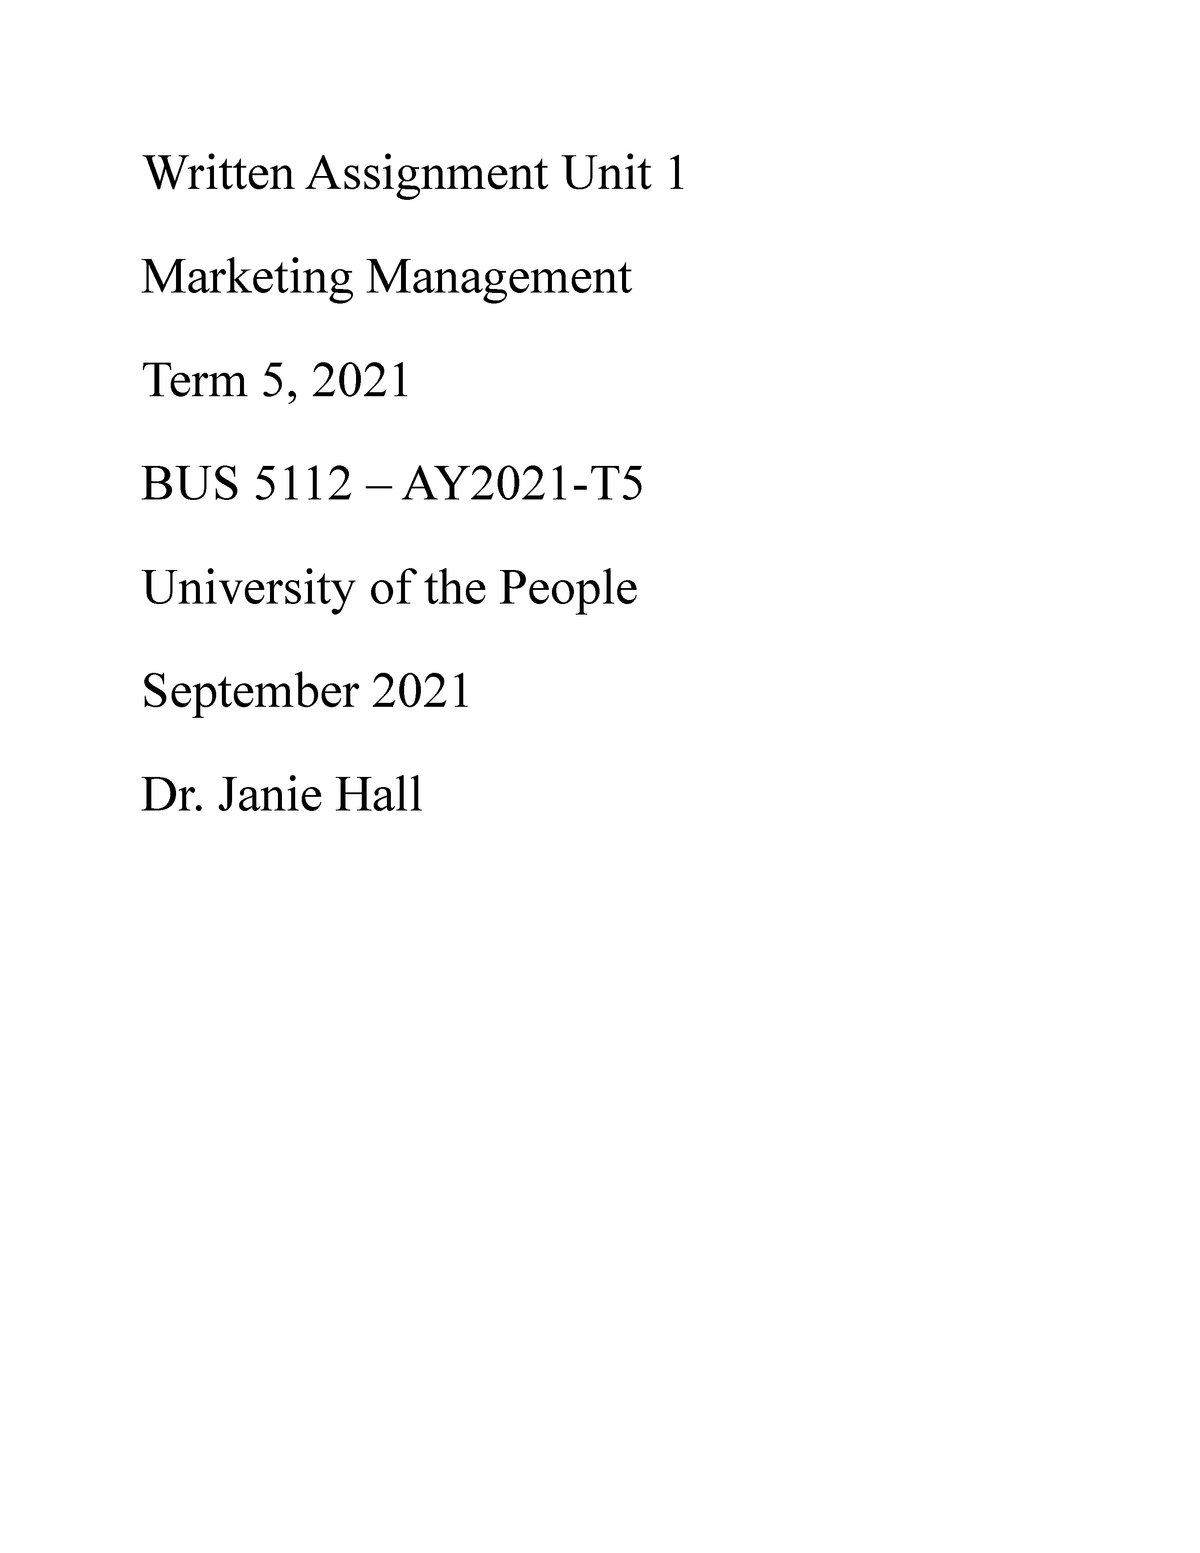 written-assignment-unit-1-janie-hall-using-the-marketing-mix-which